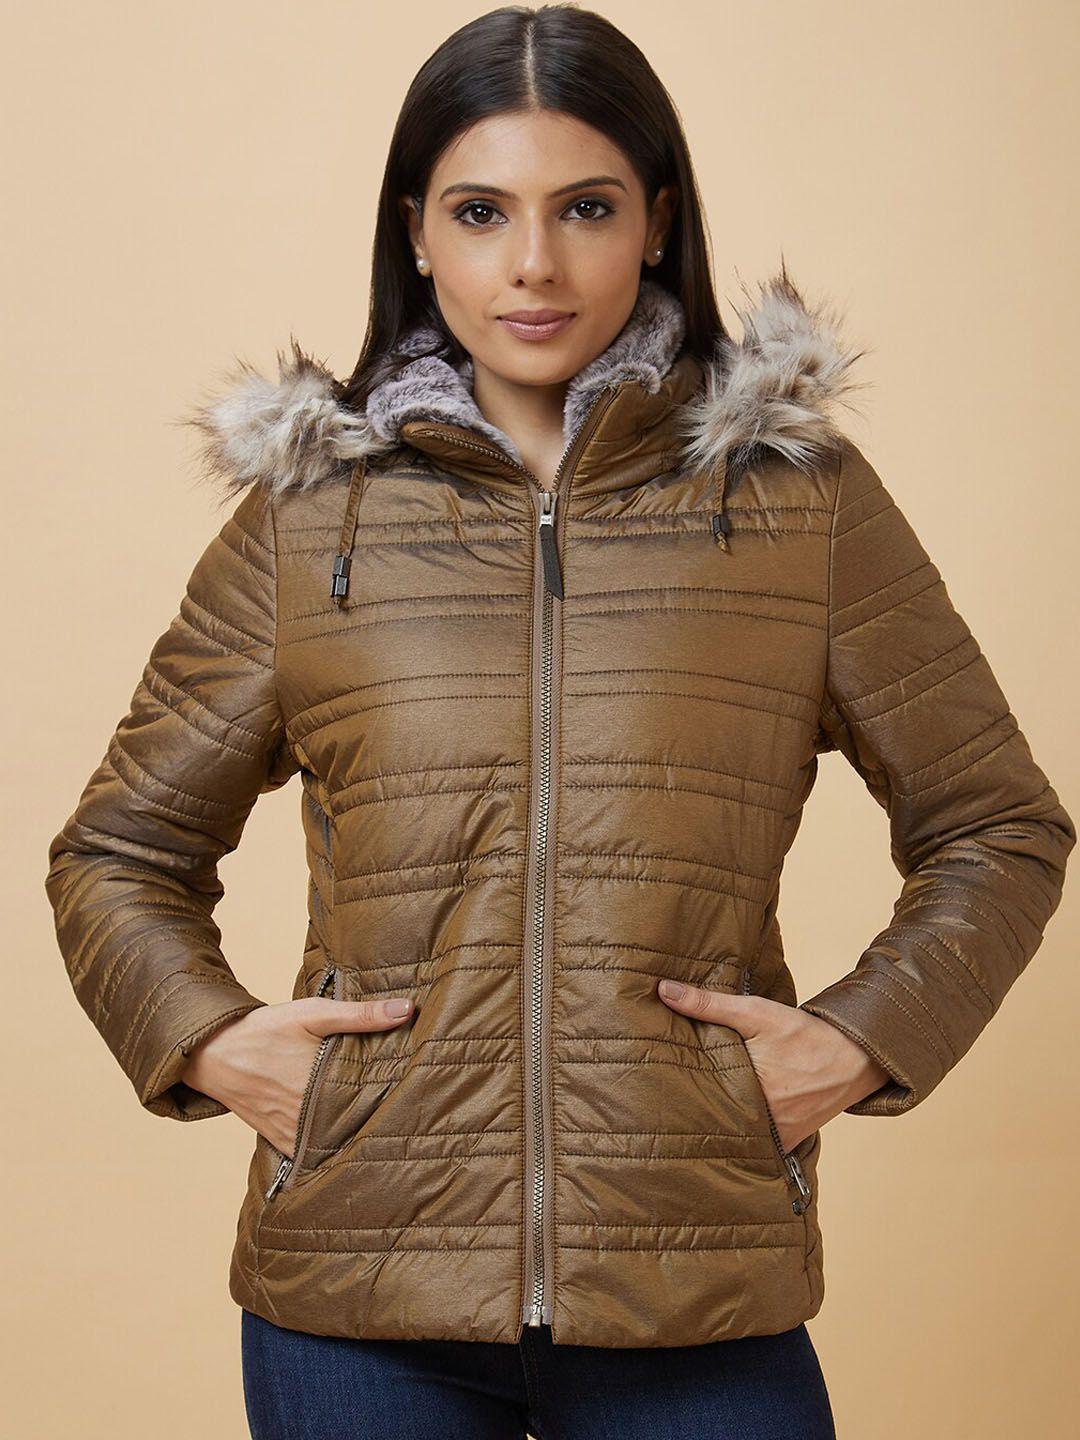 globus copper toned hooded puffer jacket